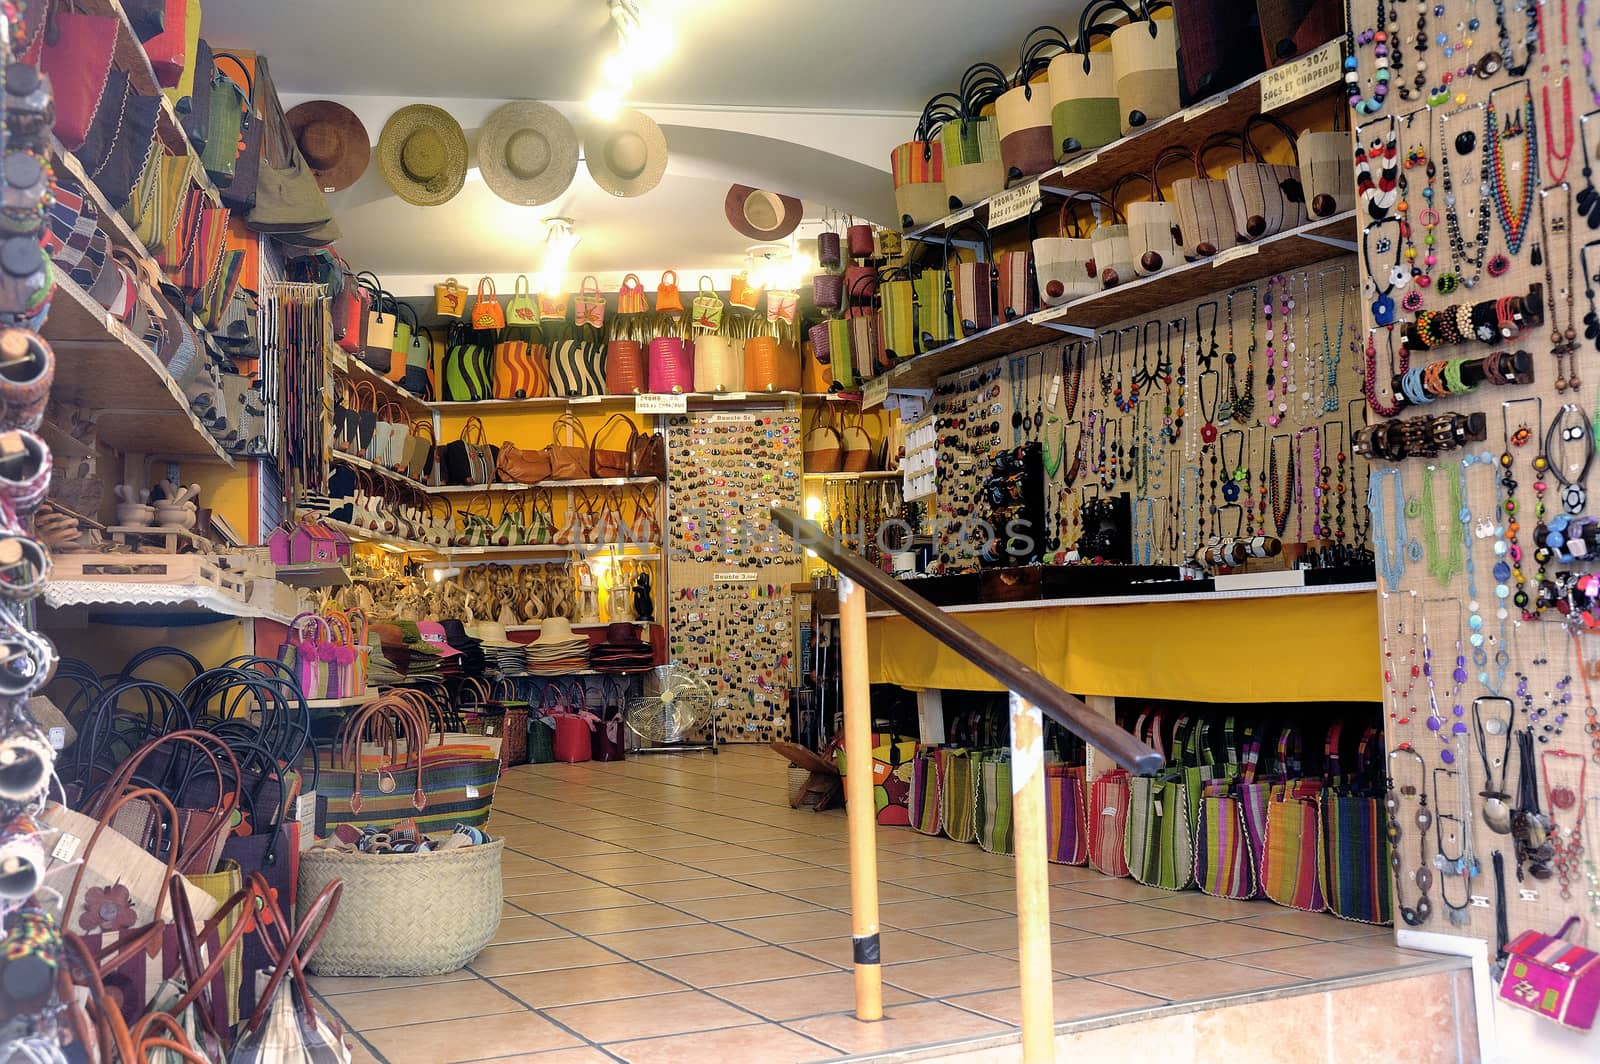 Anduze shop of handicrafts and souvenirs by gillespaire